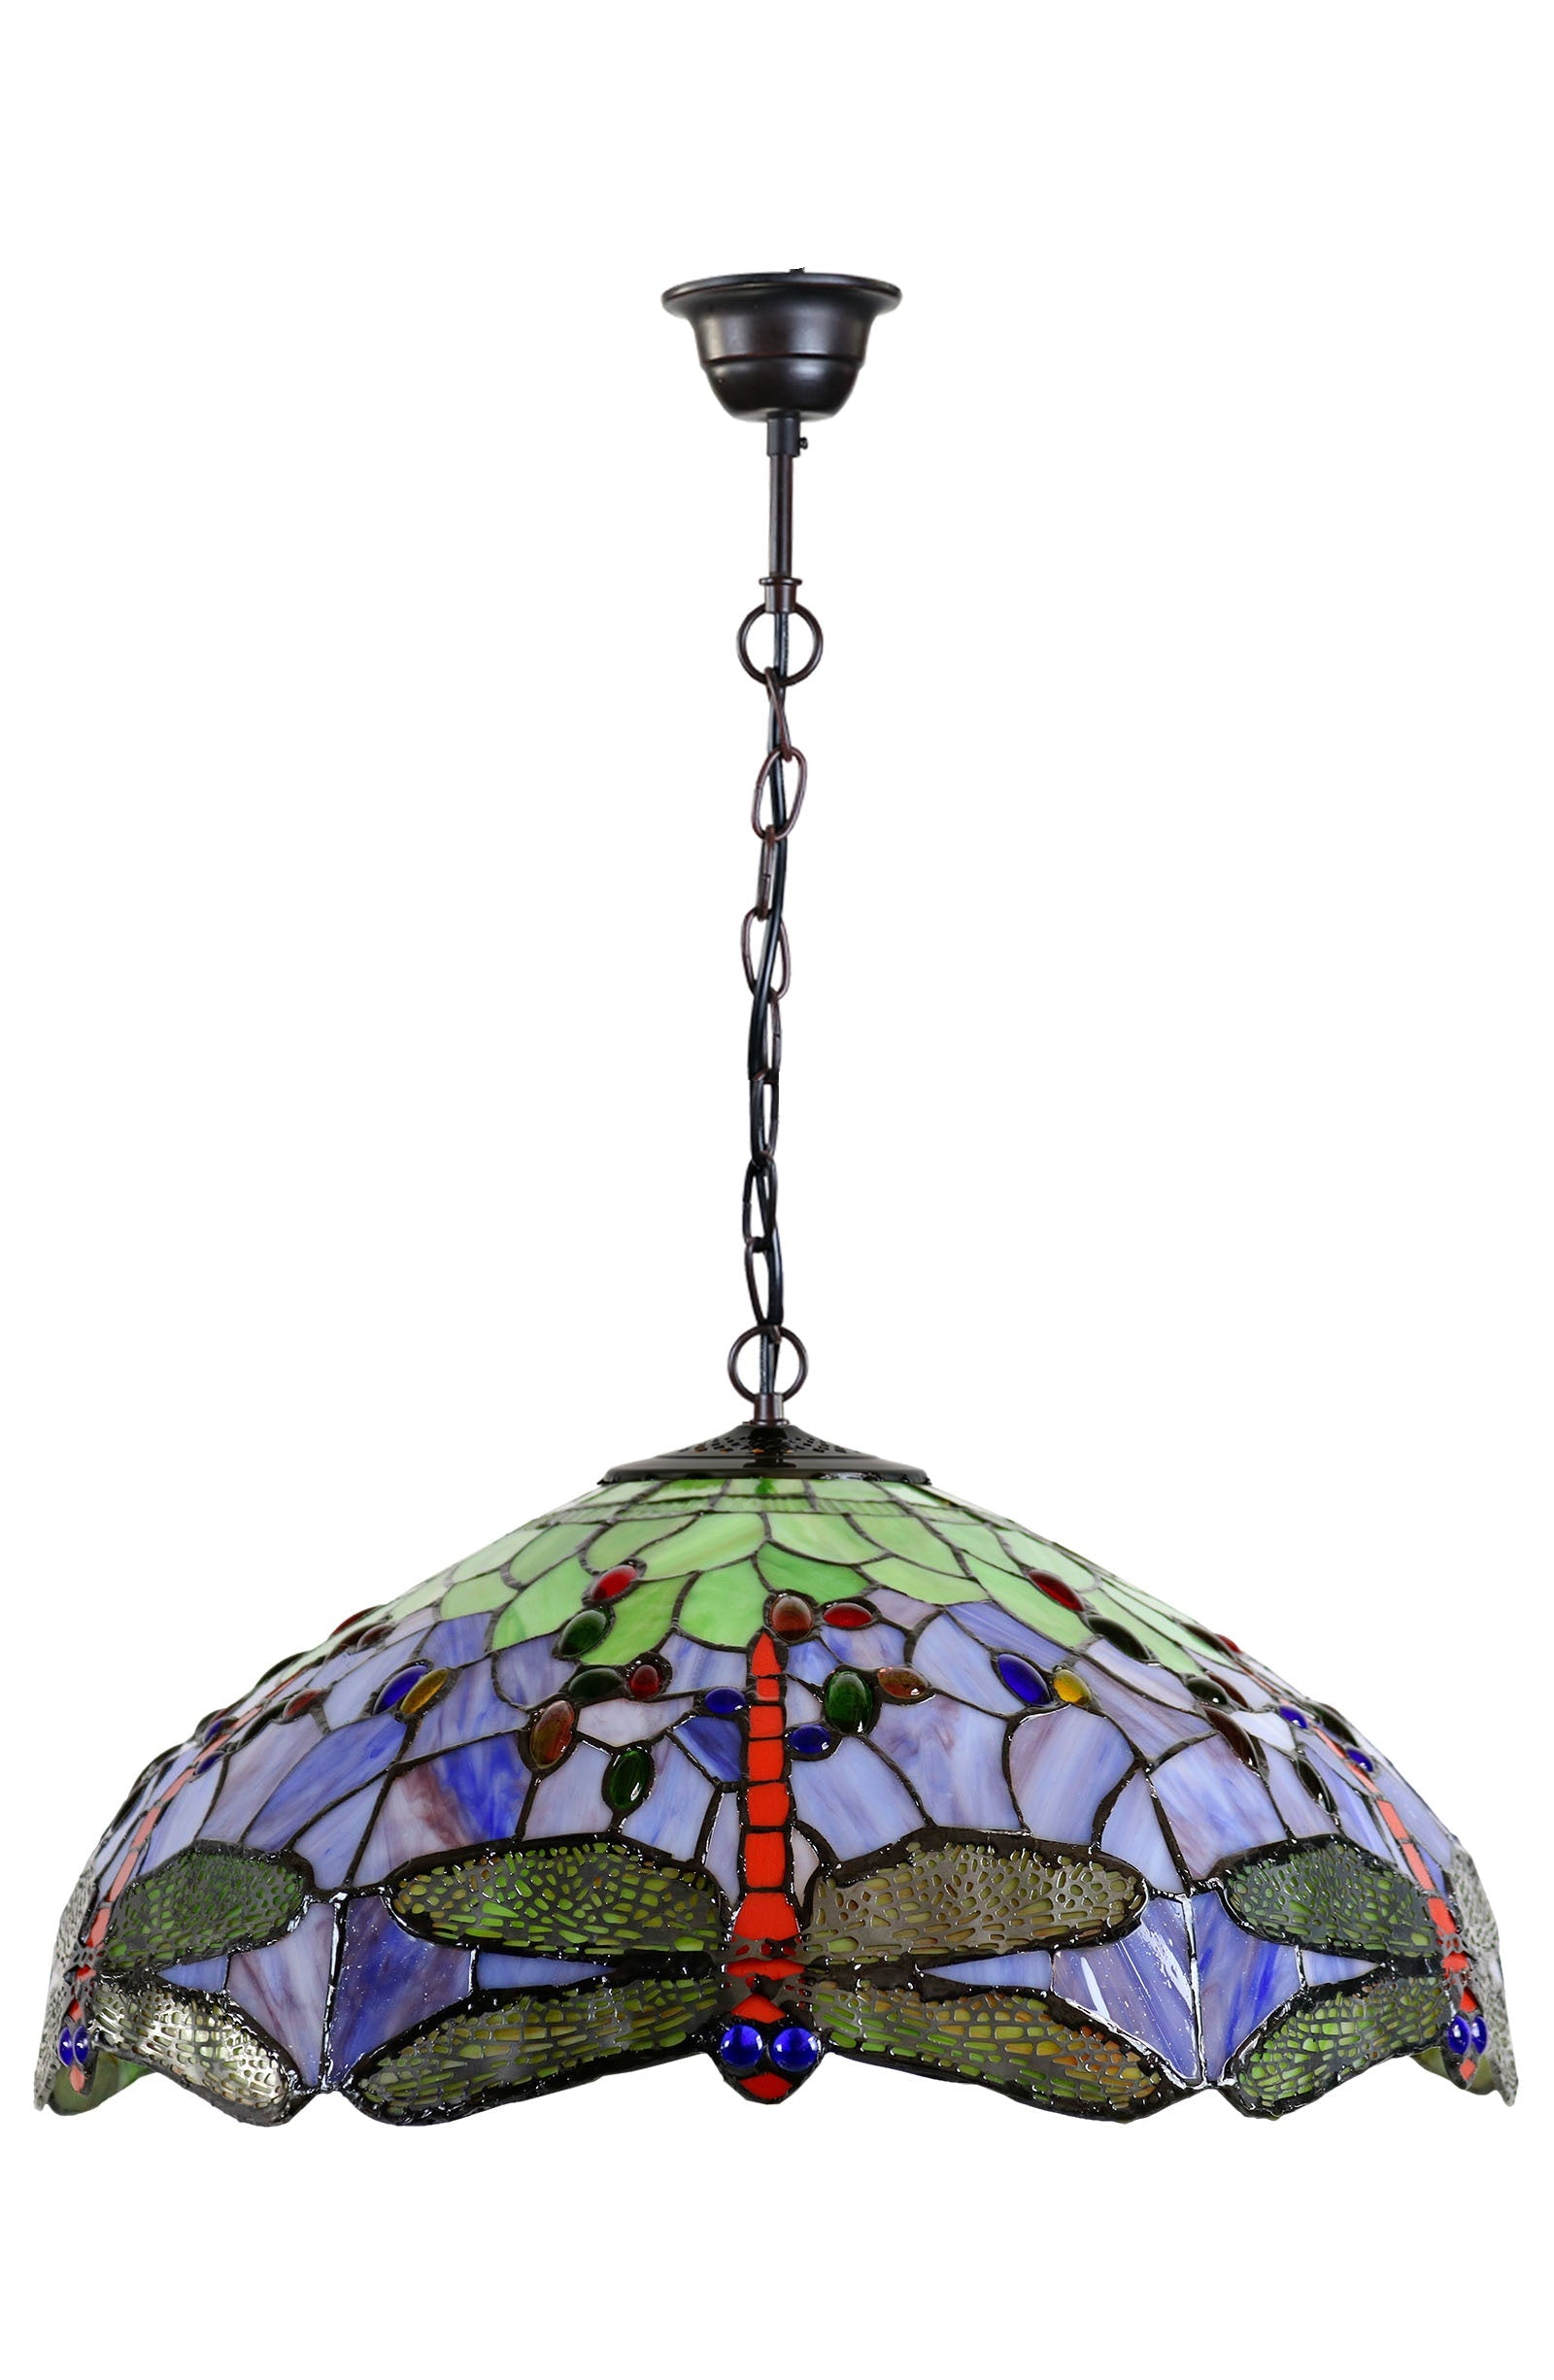 Huge 20" Traditional Purple and Green Dragonfly Stained Glass Tiffany Hanging Light